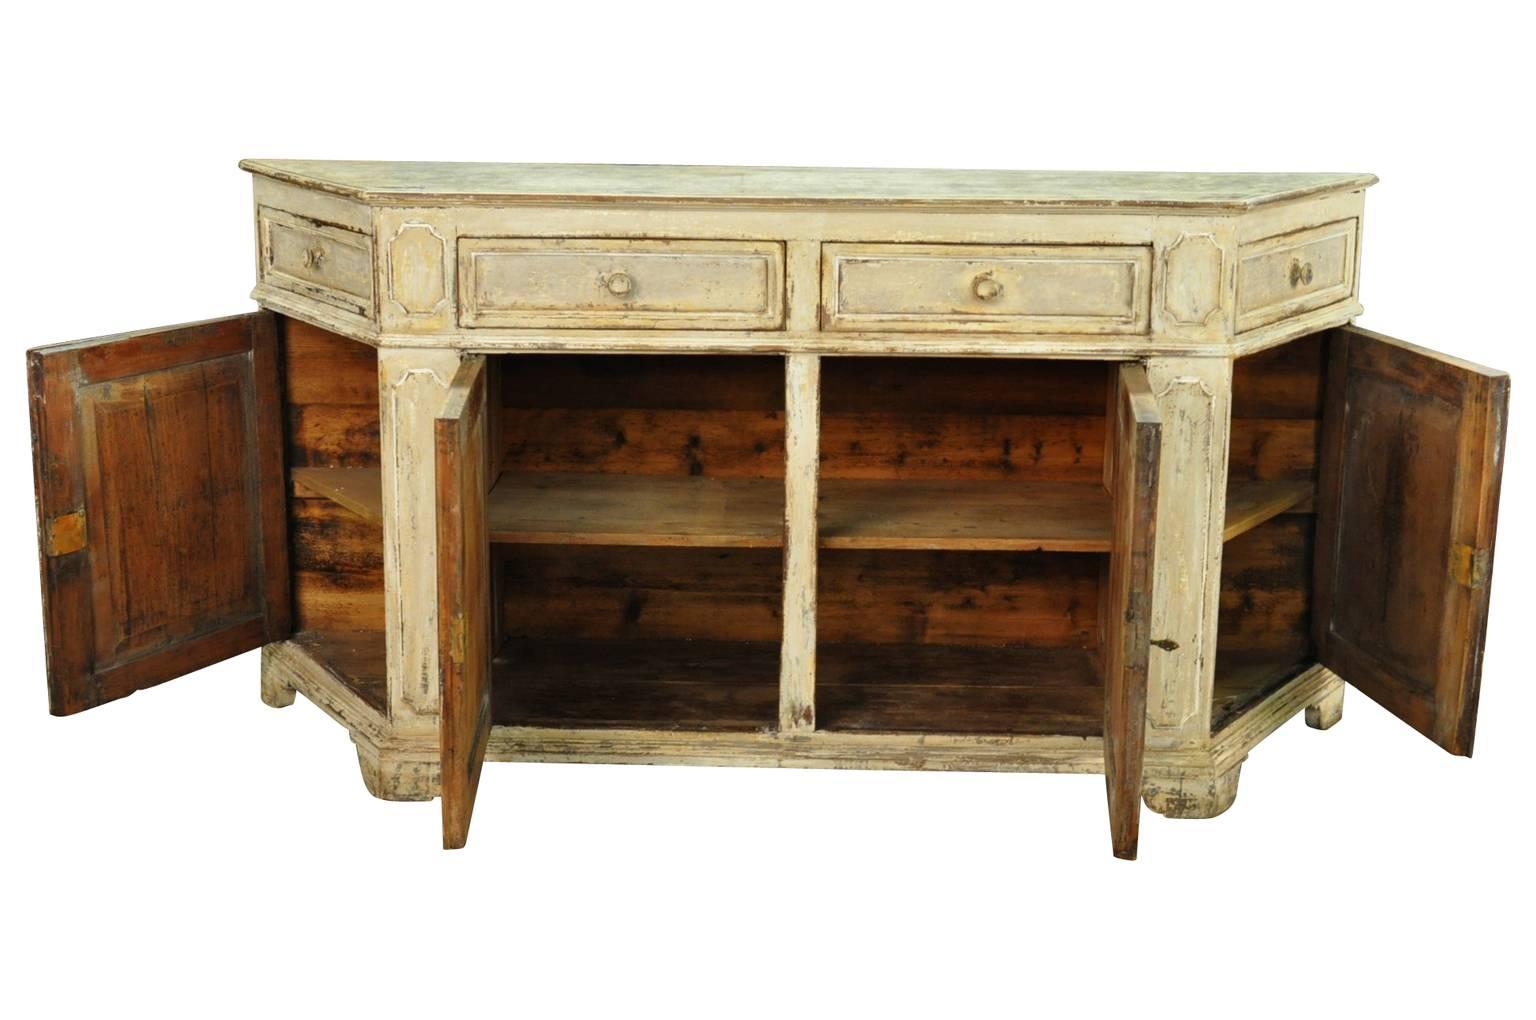 Painted Outstanding Late 18th-Early 19th Century Italian Credenza